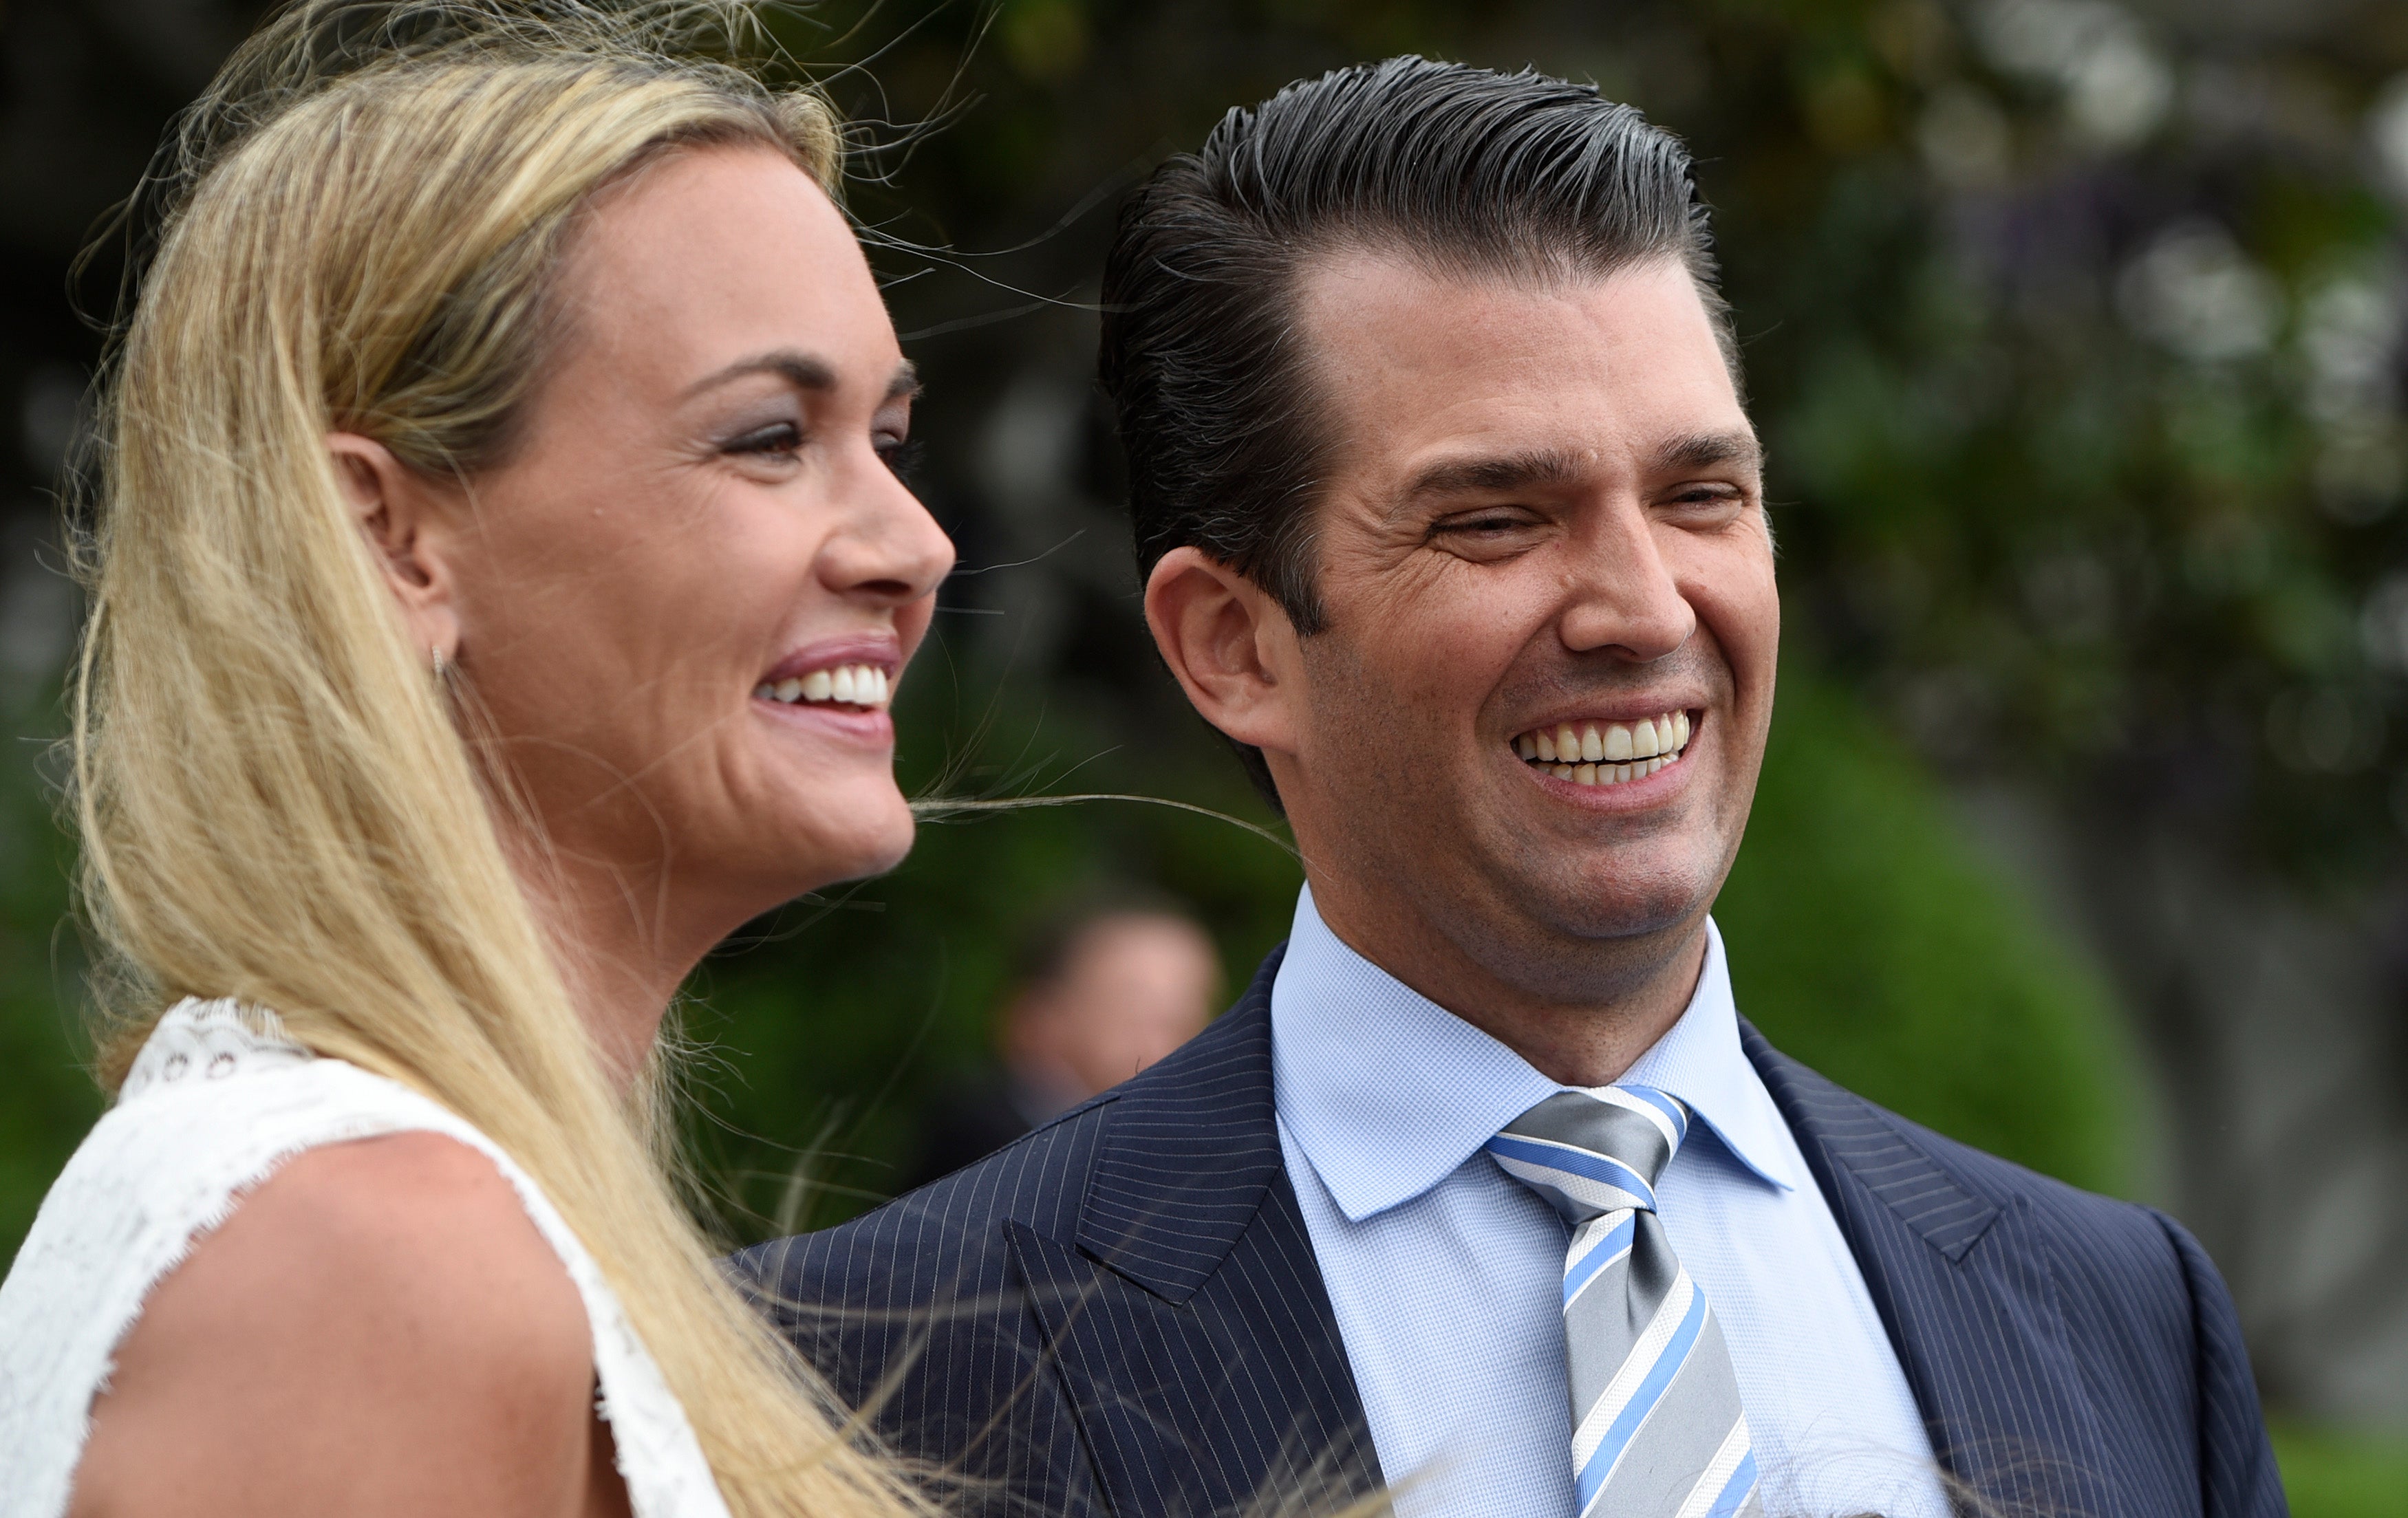 Donald Trump Jr. And His Wife Vanessa Trump Are Divorcing
